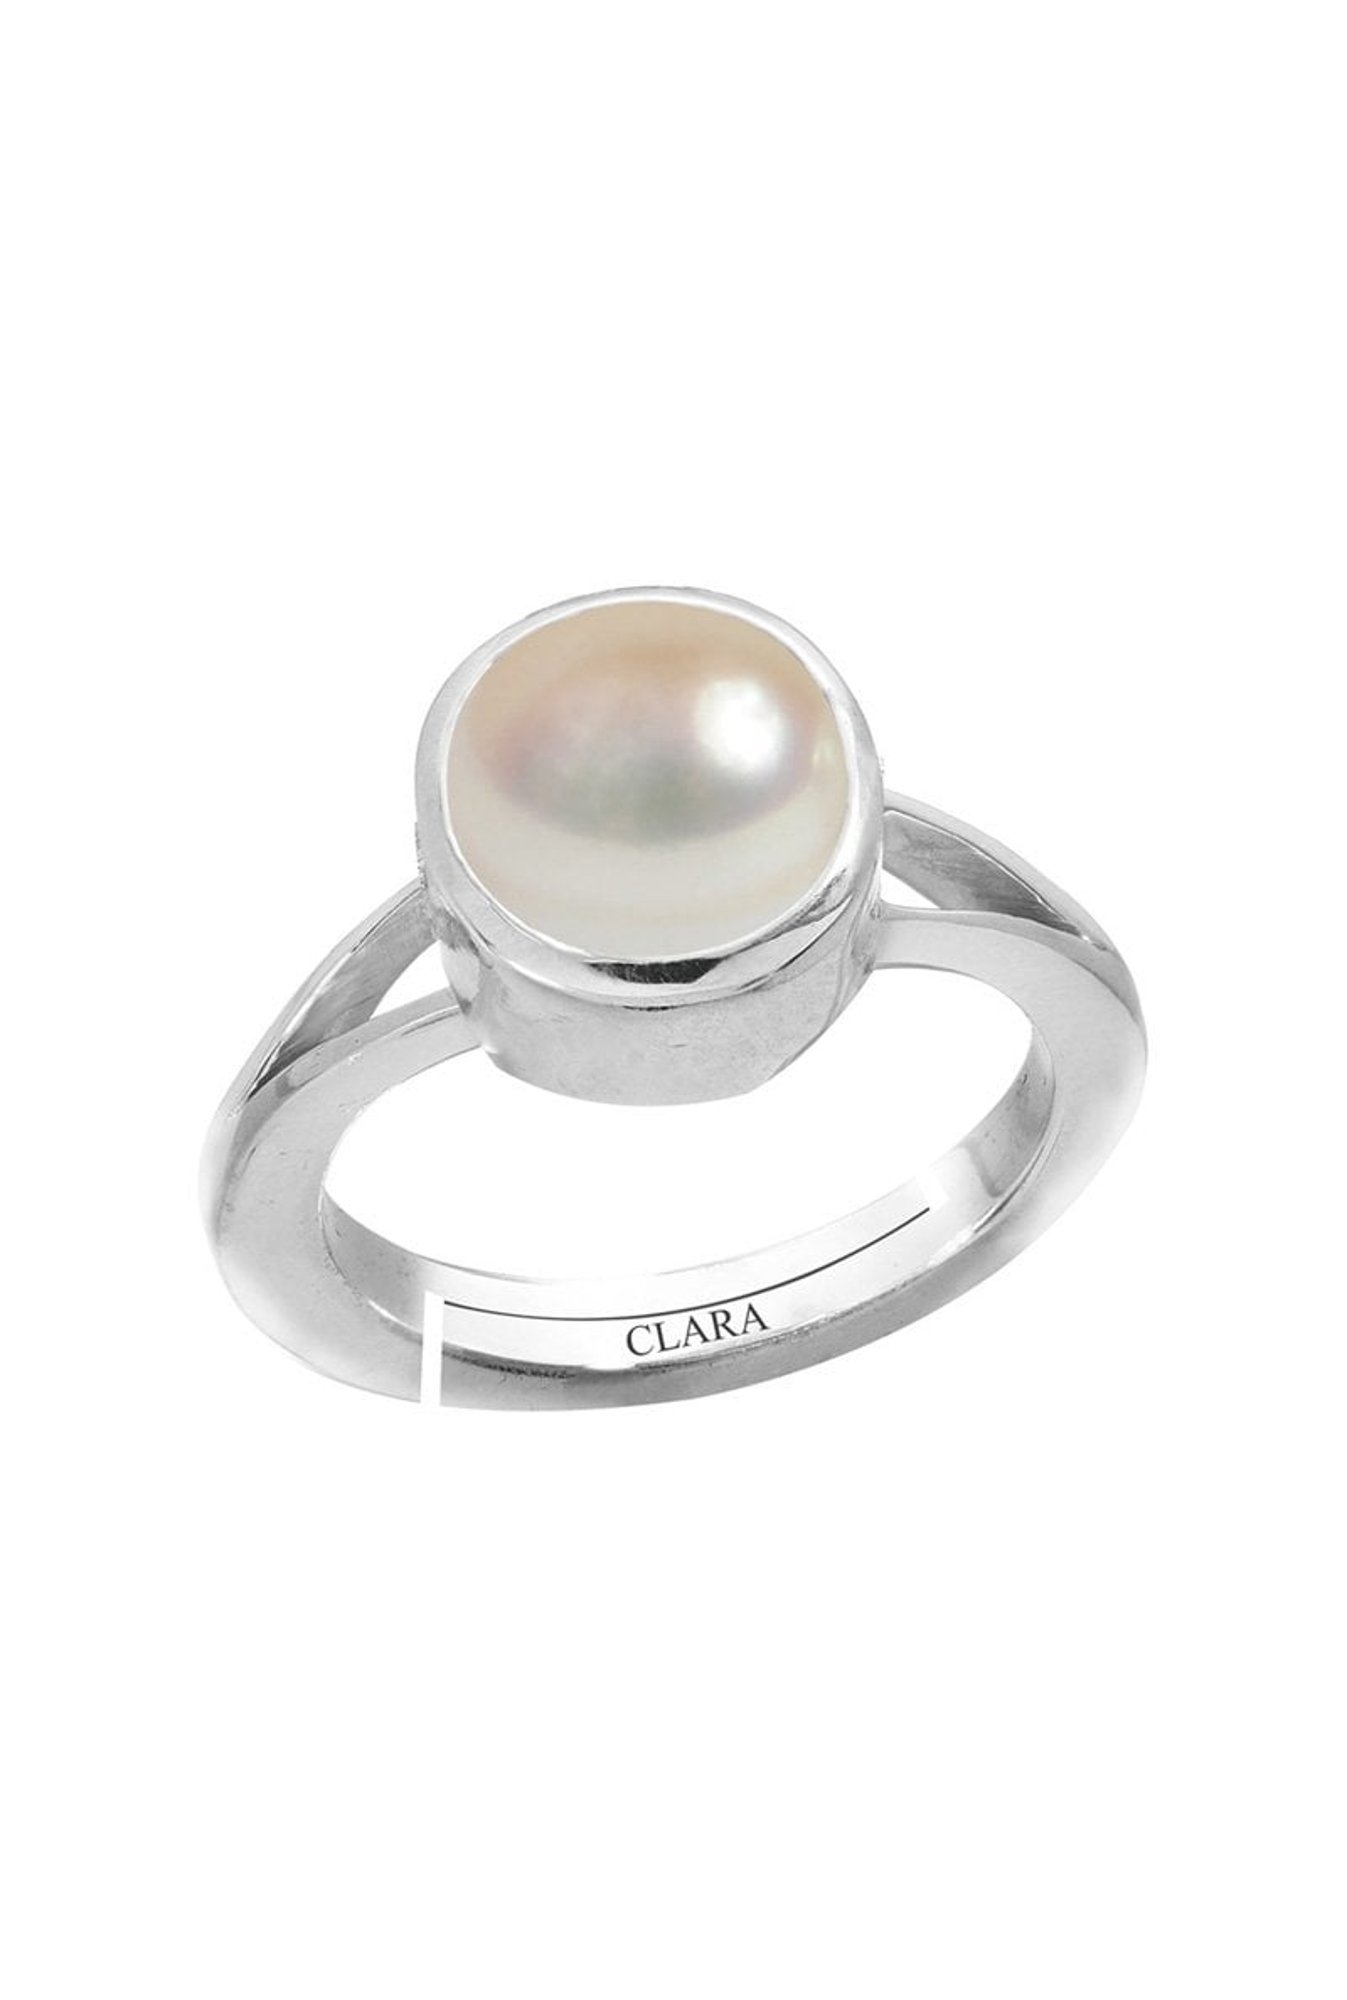 CLARA Certified Moti 7.5 cts or 8.25 ratti Stunning Sterling Silver Pearl  Ring Price in India - Buy CLARA Certified Moti 7.5 cts or 8.25 ratti  Stunning Sterling Silver Pearl Ring Online